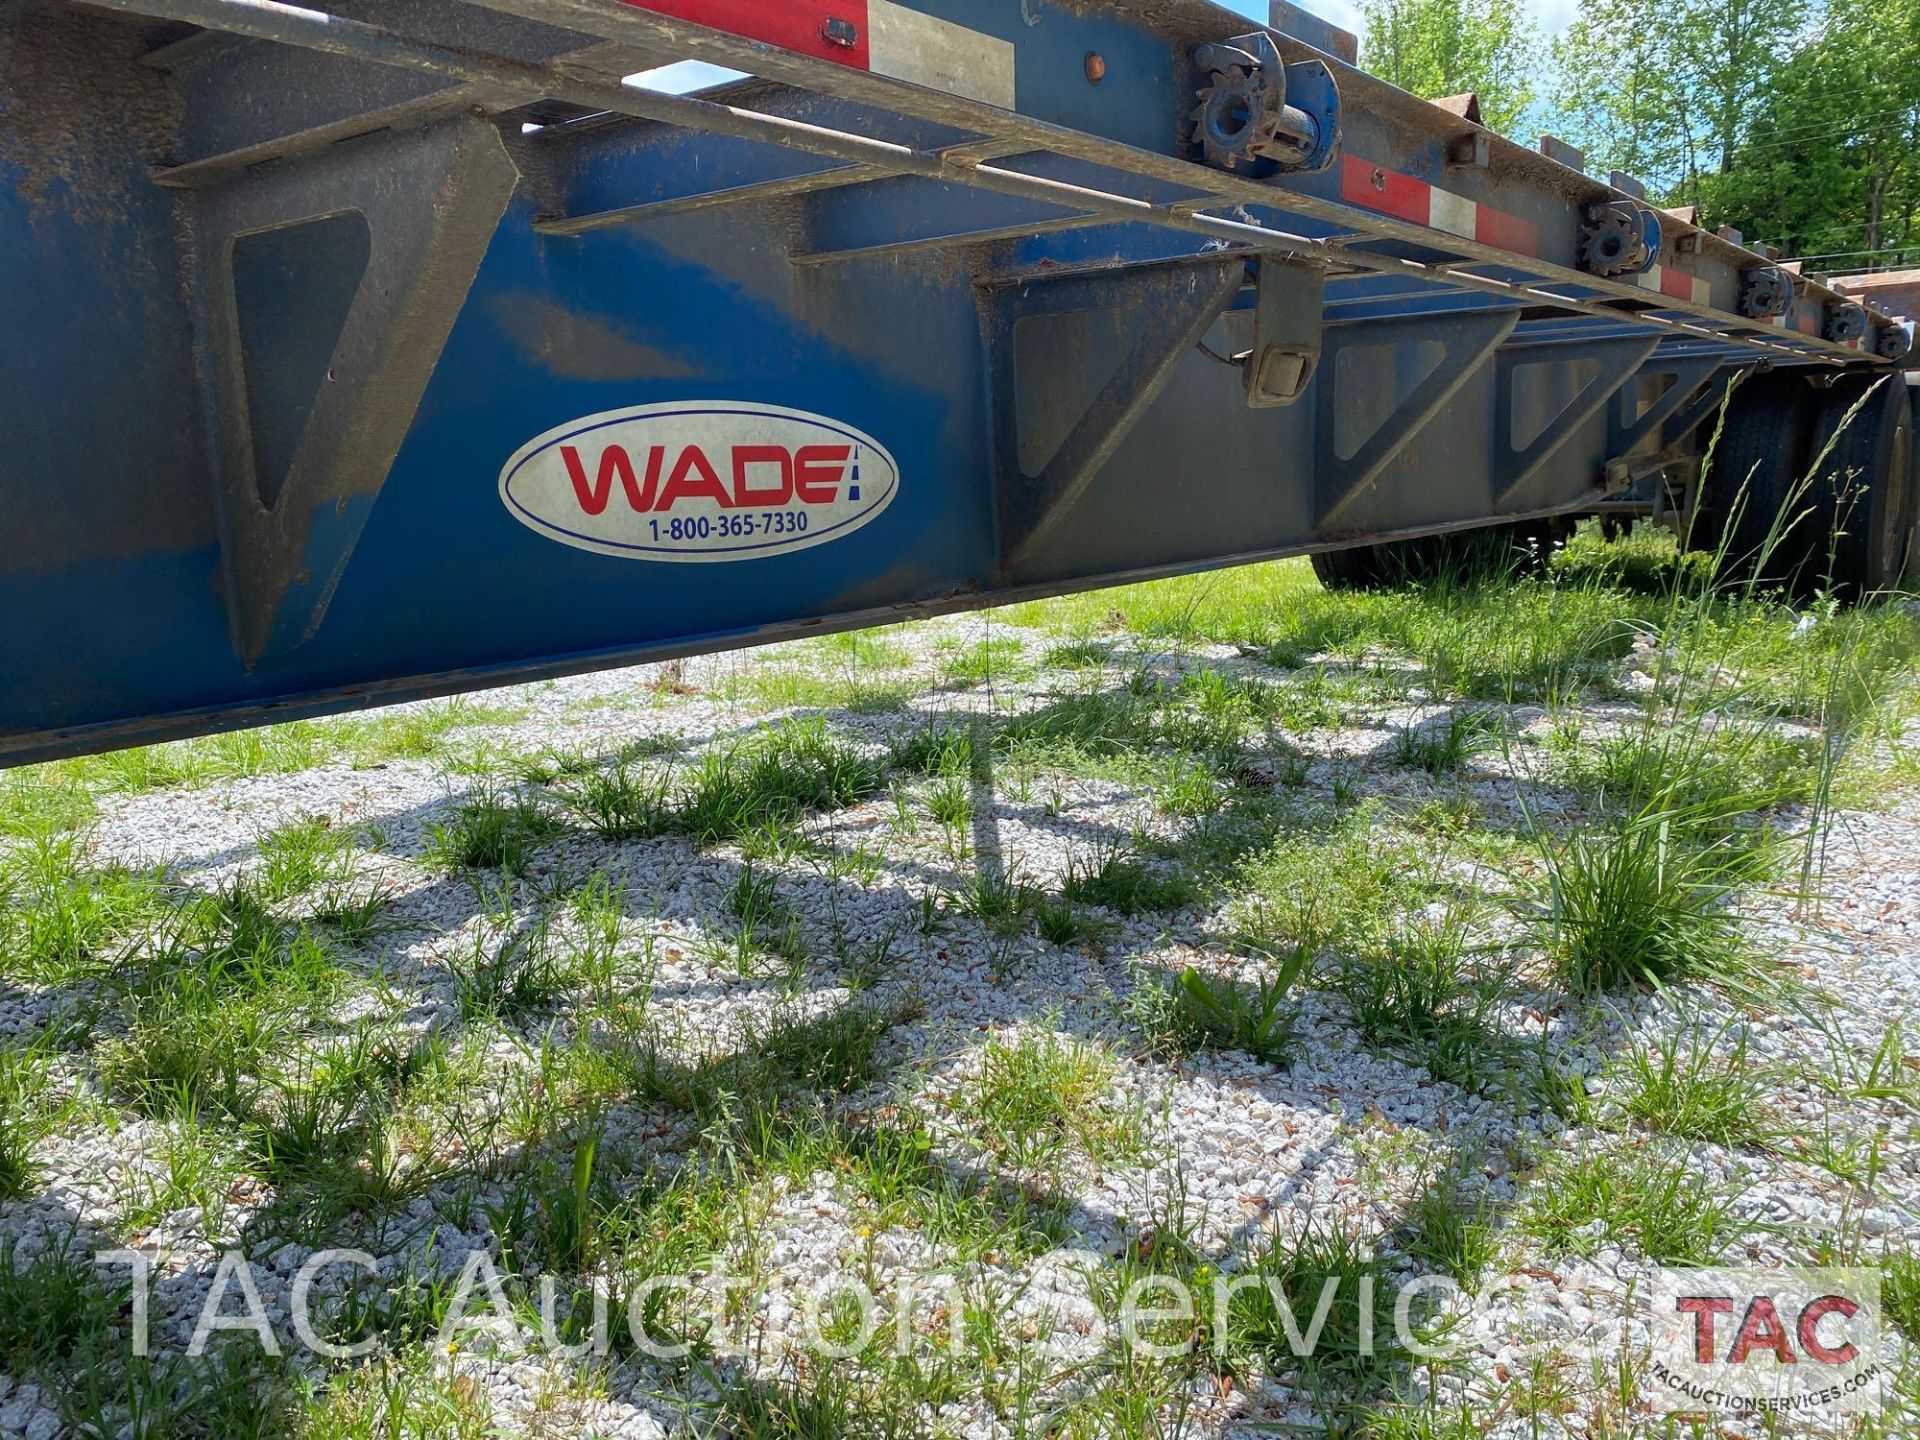 2020 Wade Live Poultry Step Deck Trailer - Image 14 of 33